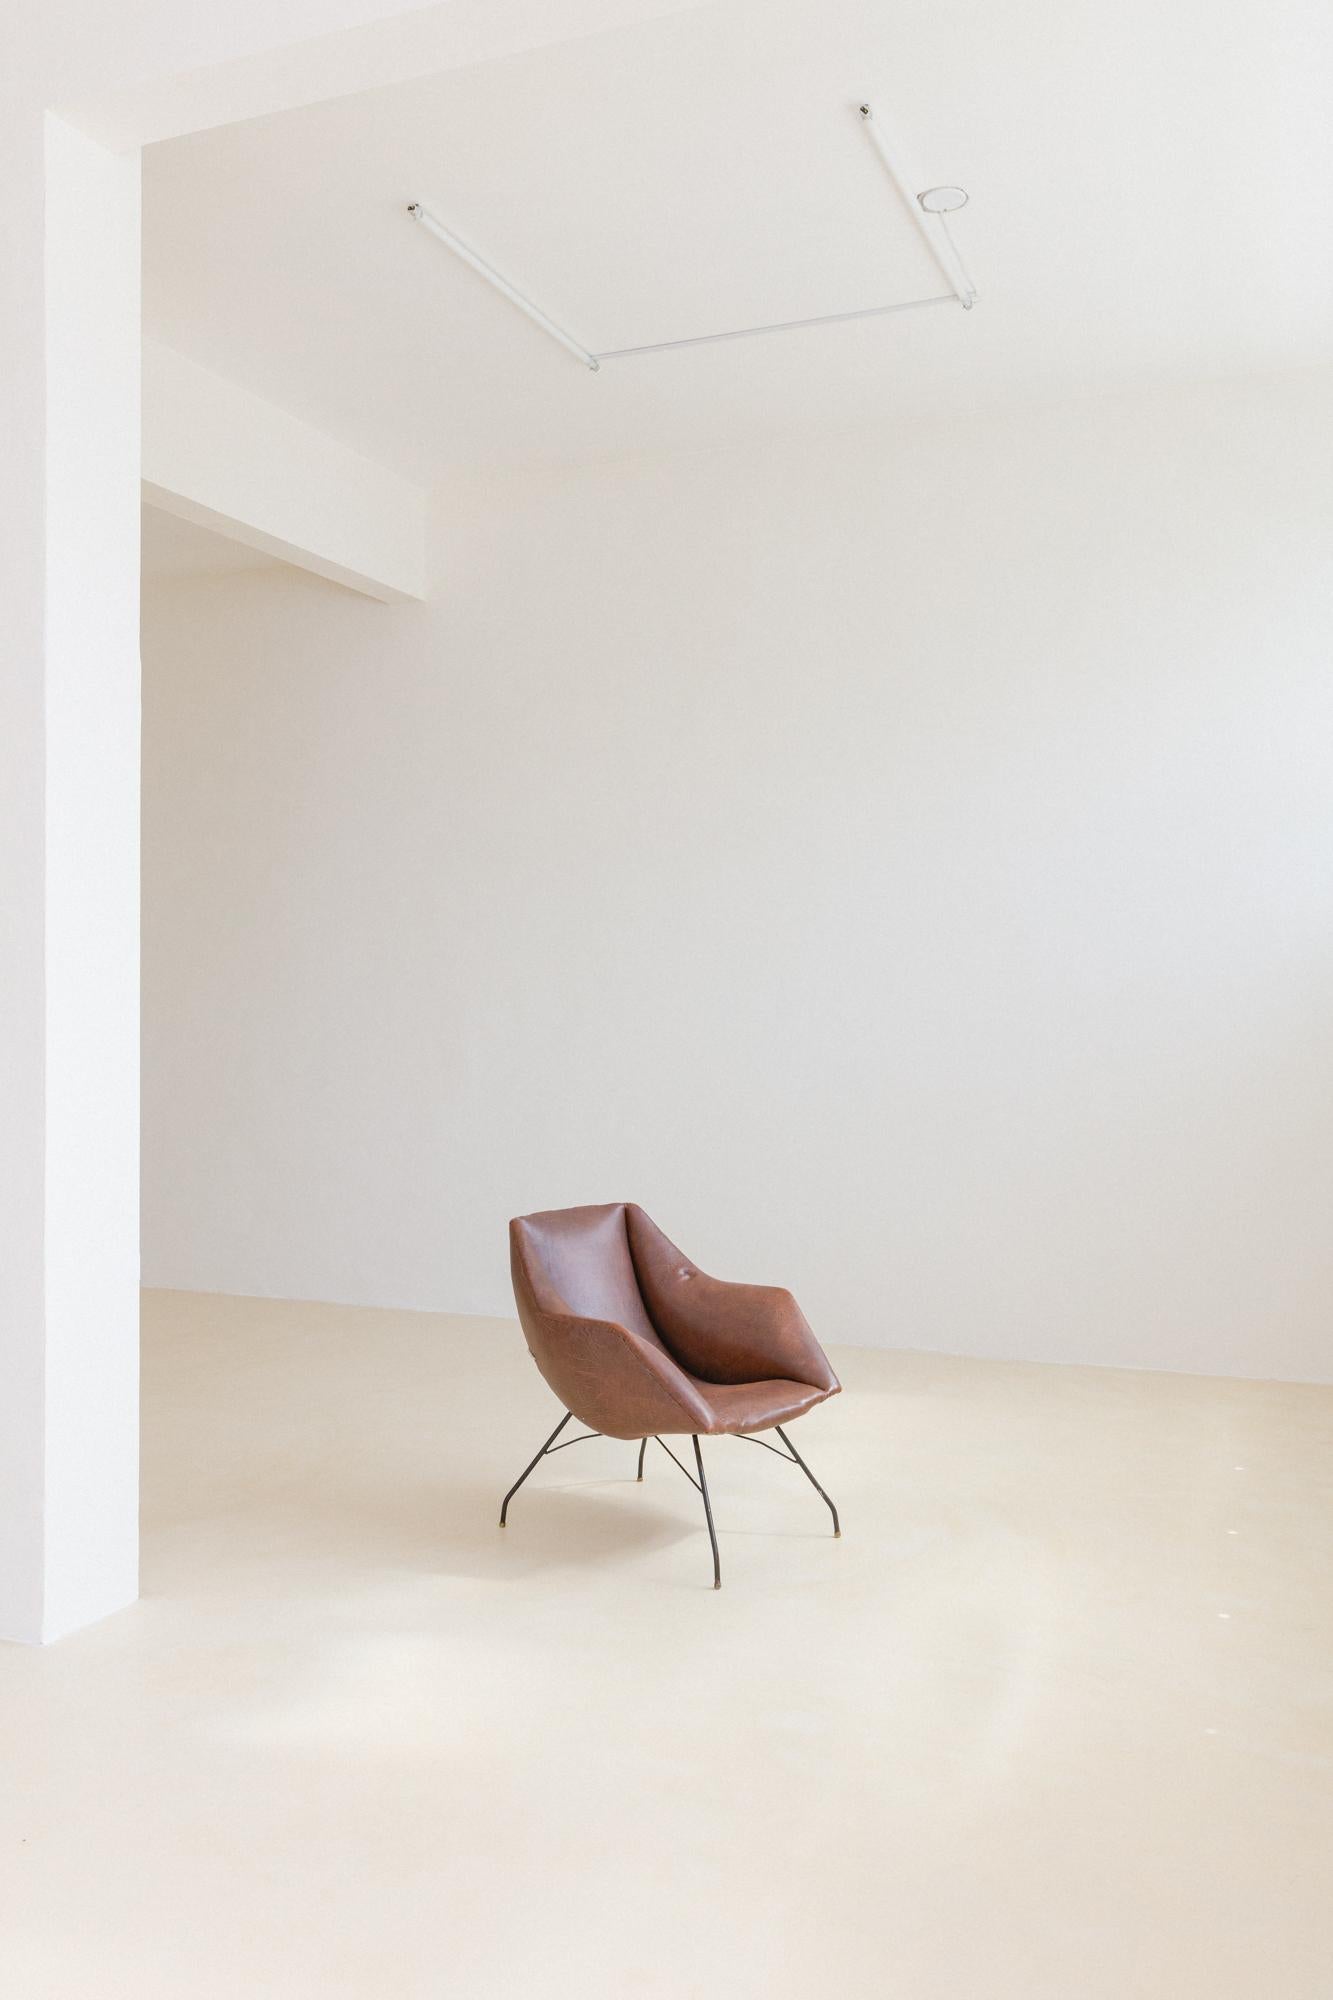 Concha armchair is one of the most iconic pieces designed by Martin Eisler (1913-1977). The armchair was created in 1953 and produced by Móveis Artesanal and then Forma S.A. Móveis e Objetos de Arte. “Galeria Artesanal,” the first showroom that